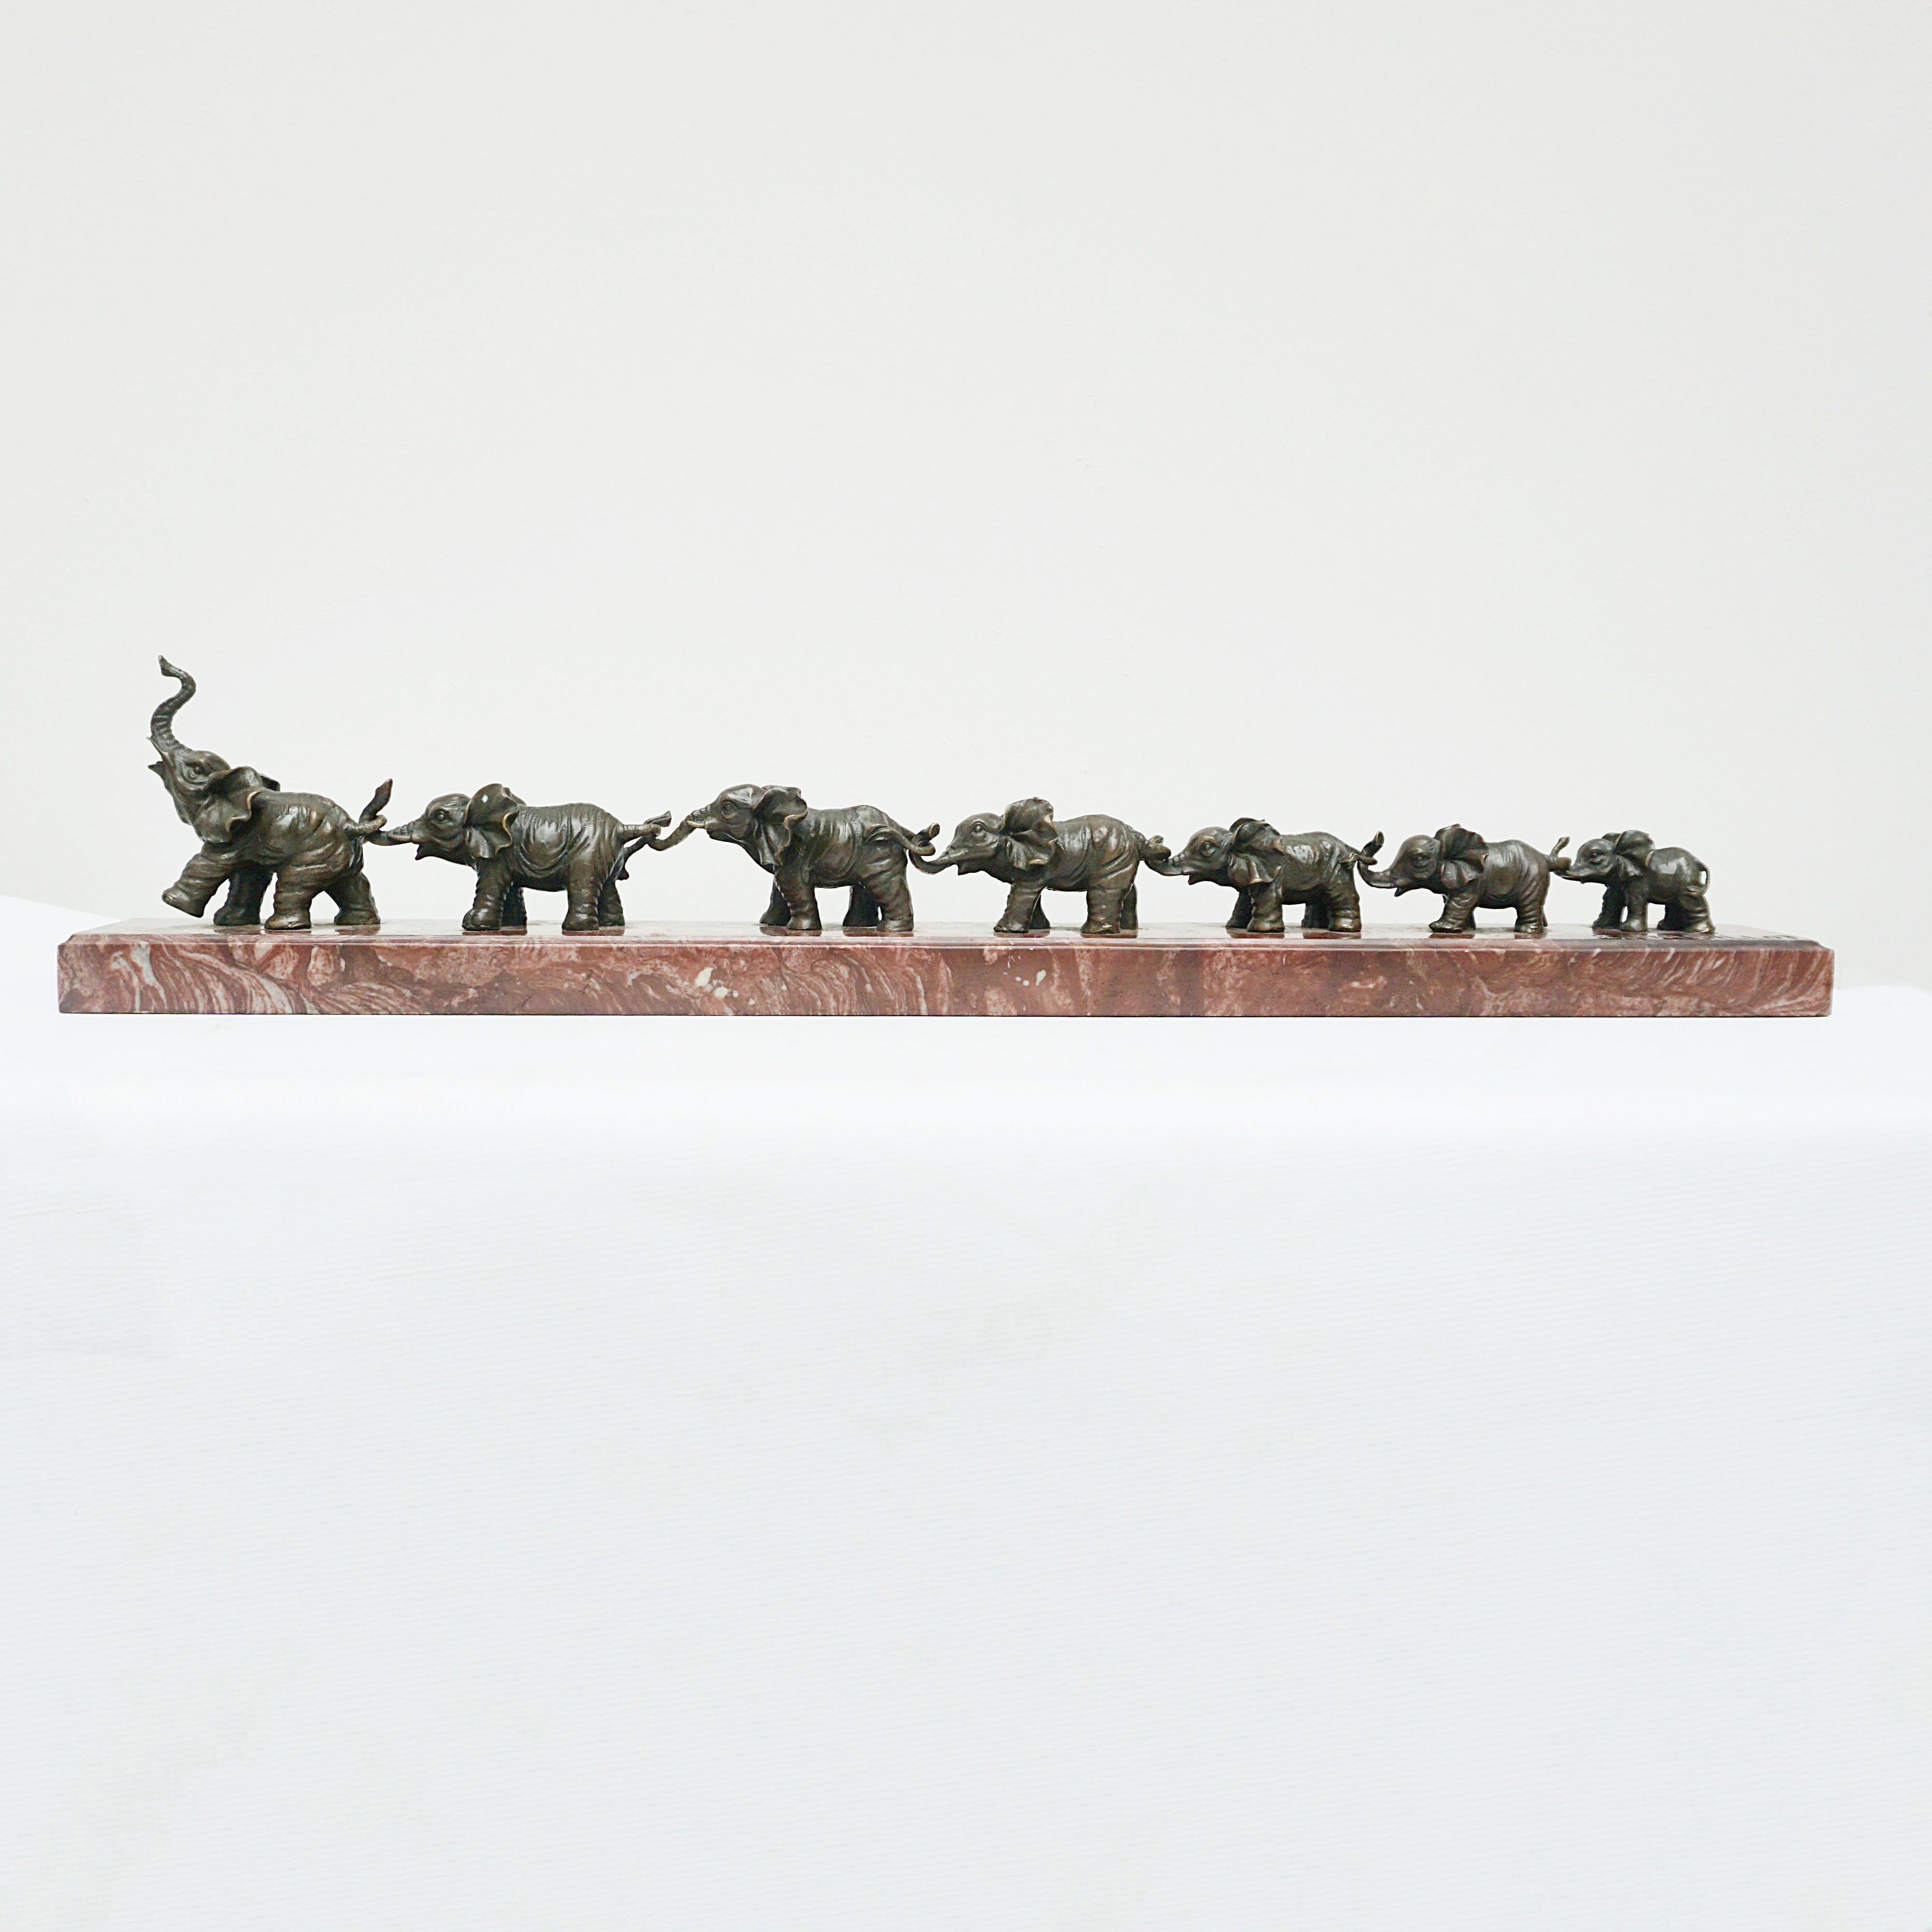 Contemporary Bronze Sculpture of a Herd of Elephants on a Marble Base 2